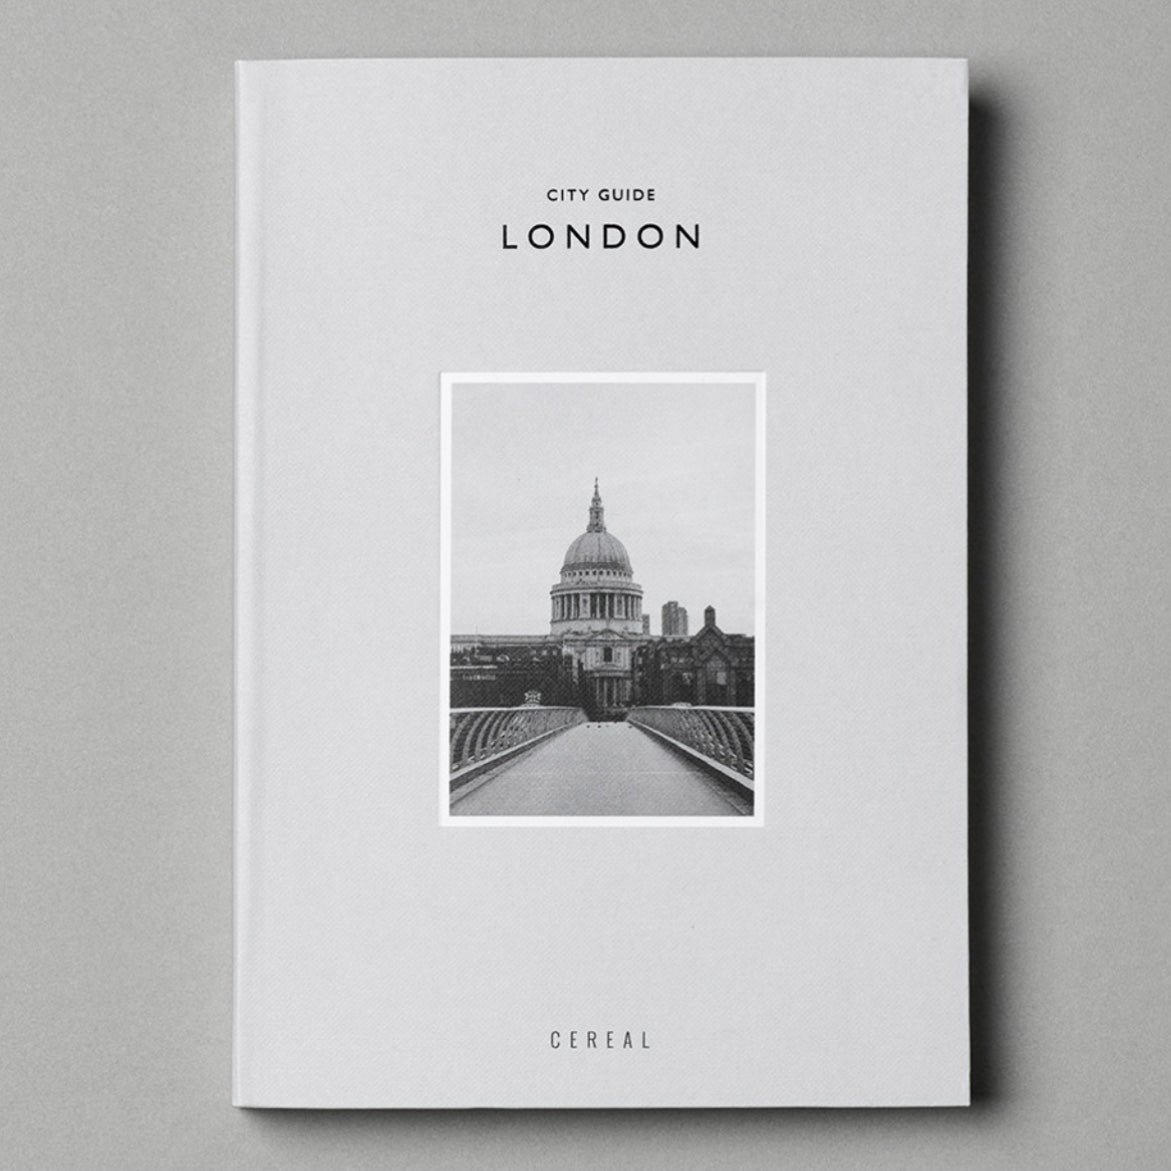 CEREAL CITY GUIDE: LONDON